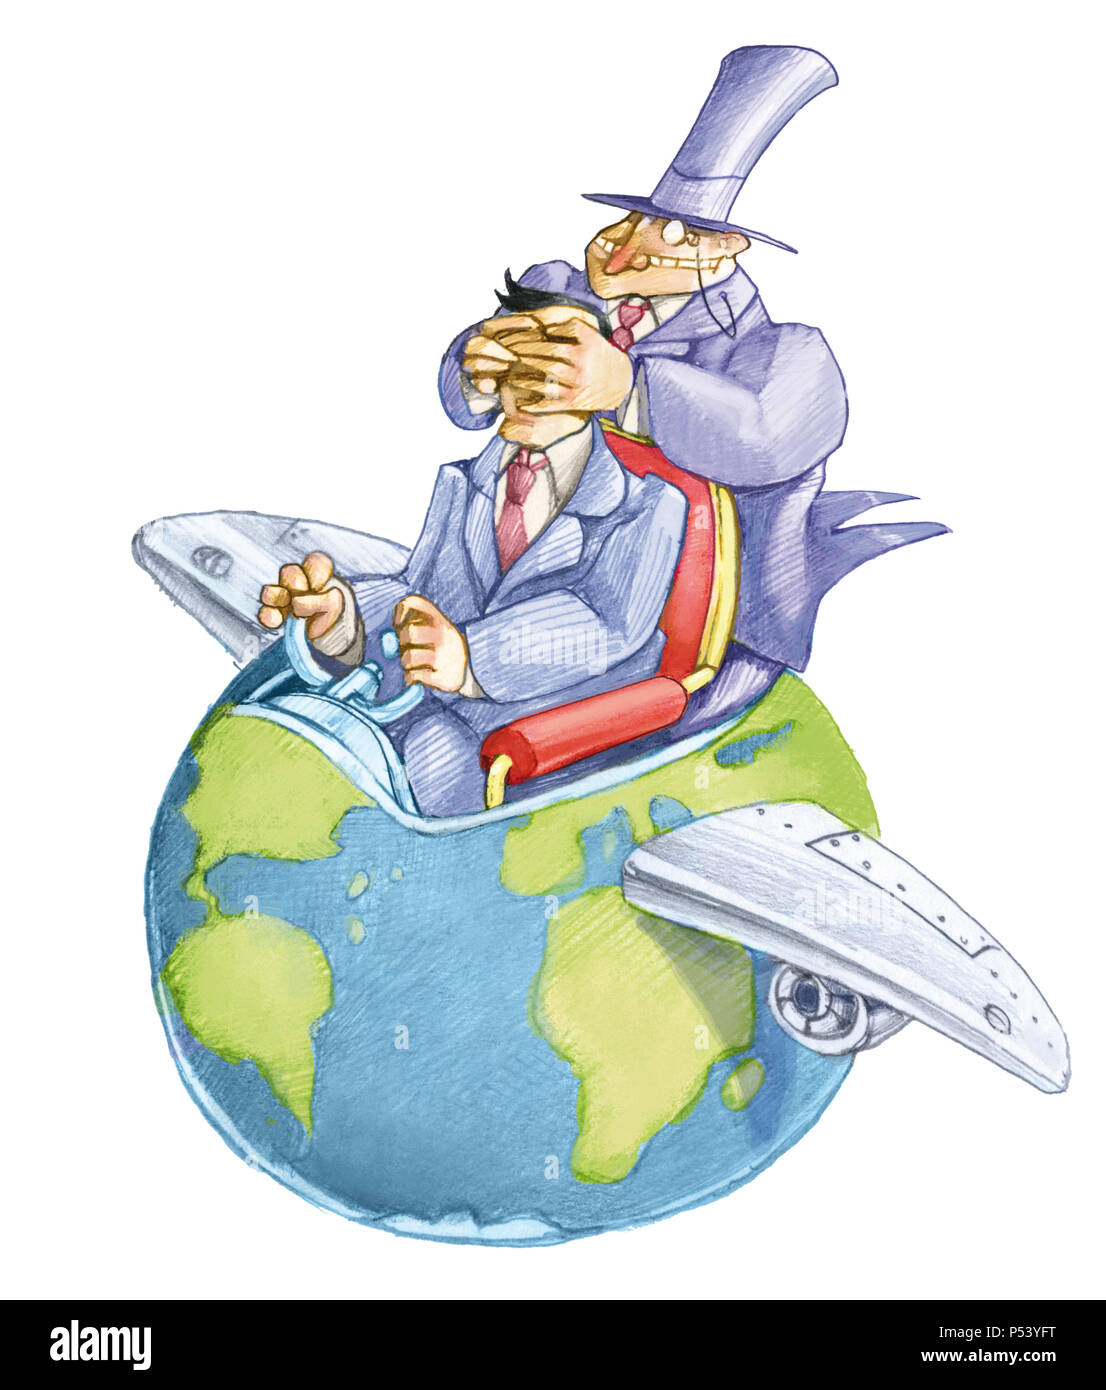 banker closes the eyes of a political that drives the world that seems an airplane political funny cartoon Stock Photo